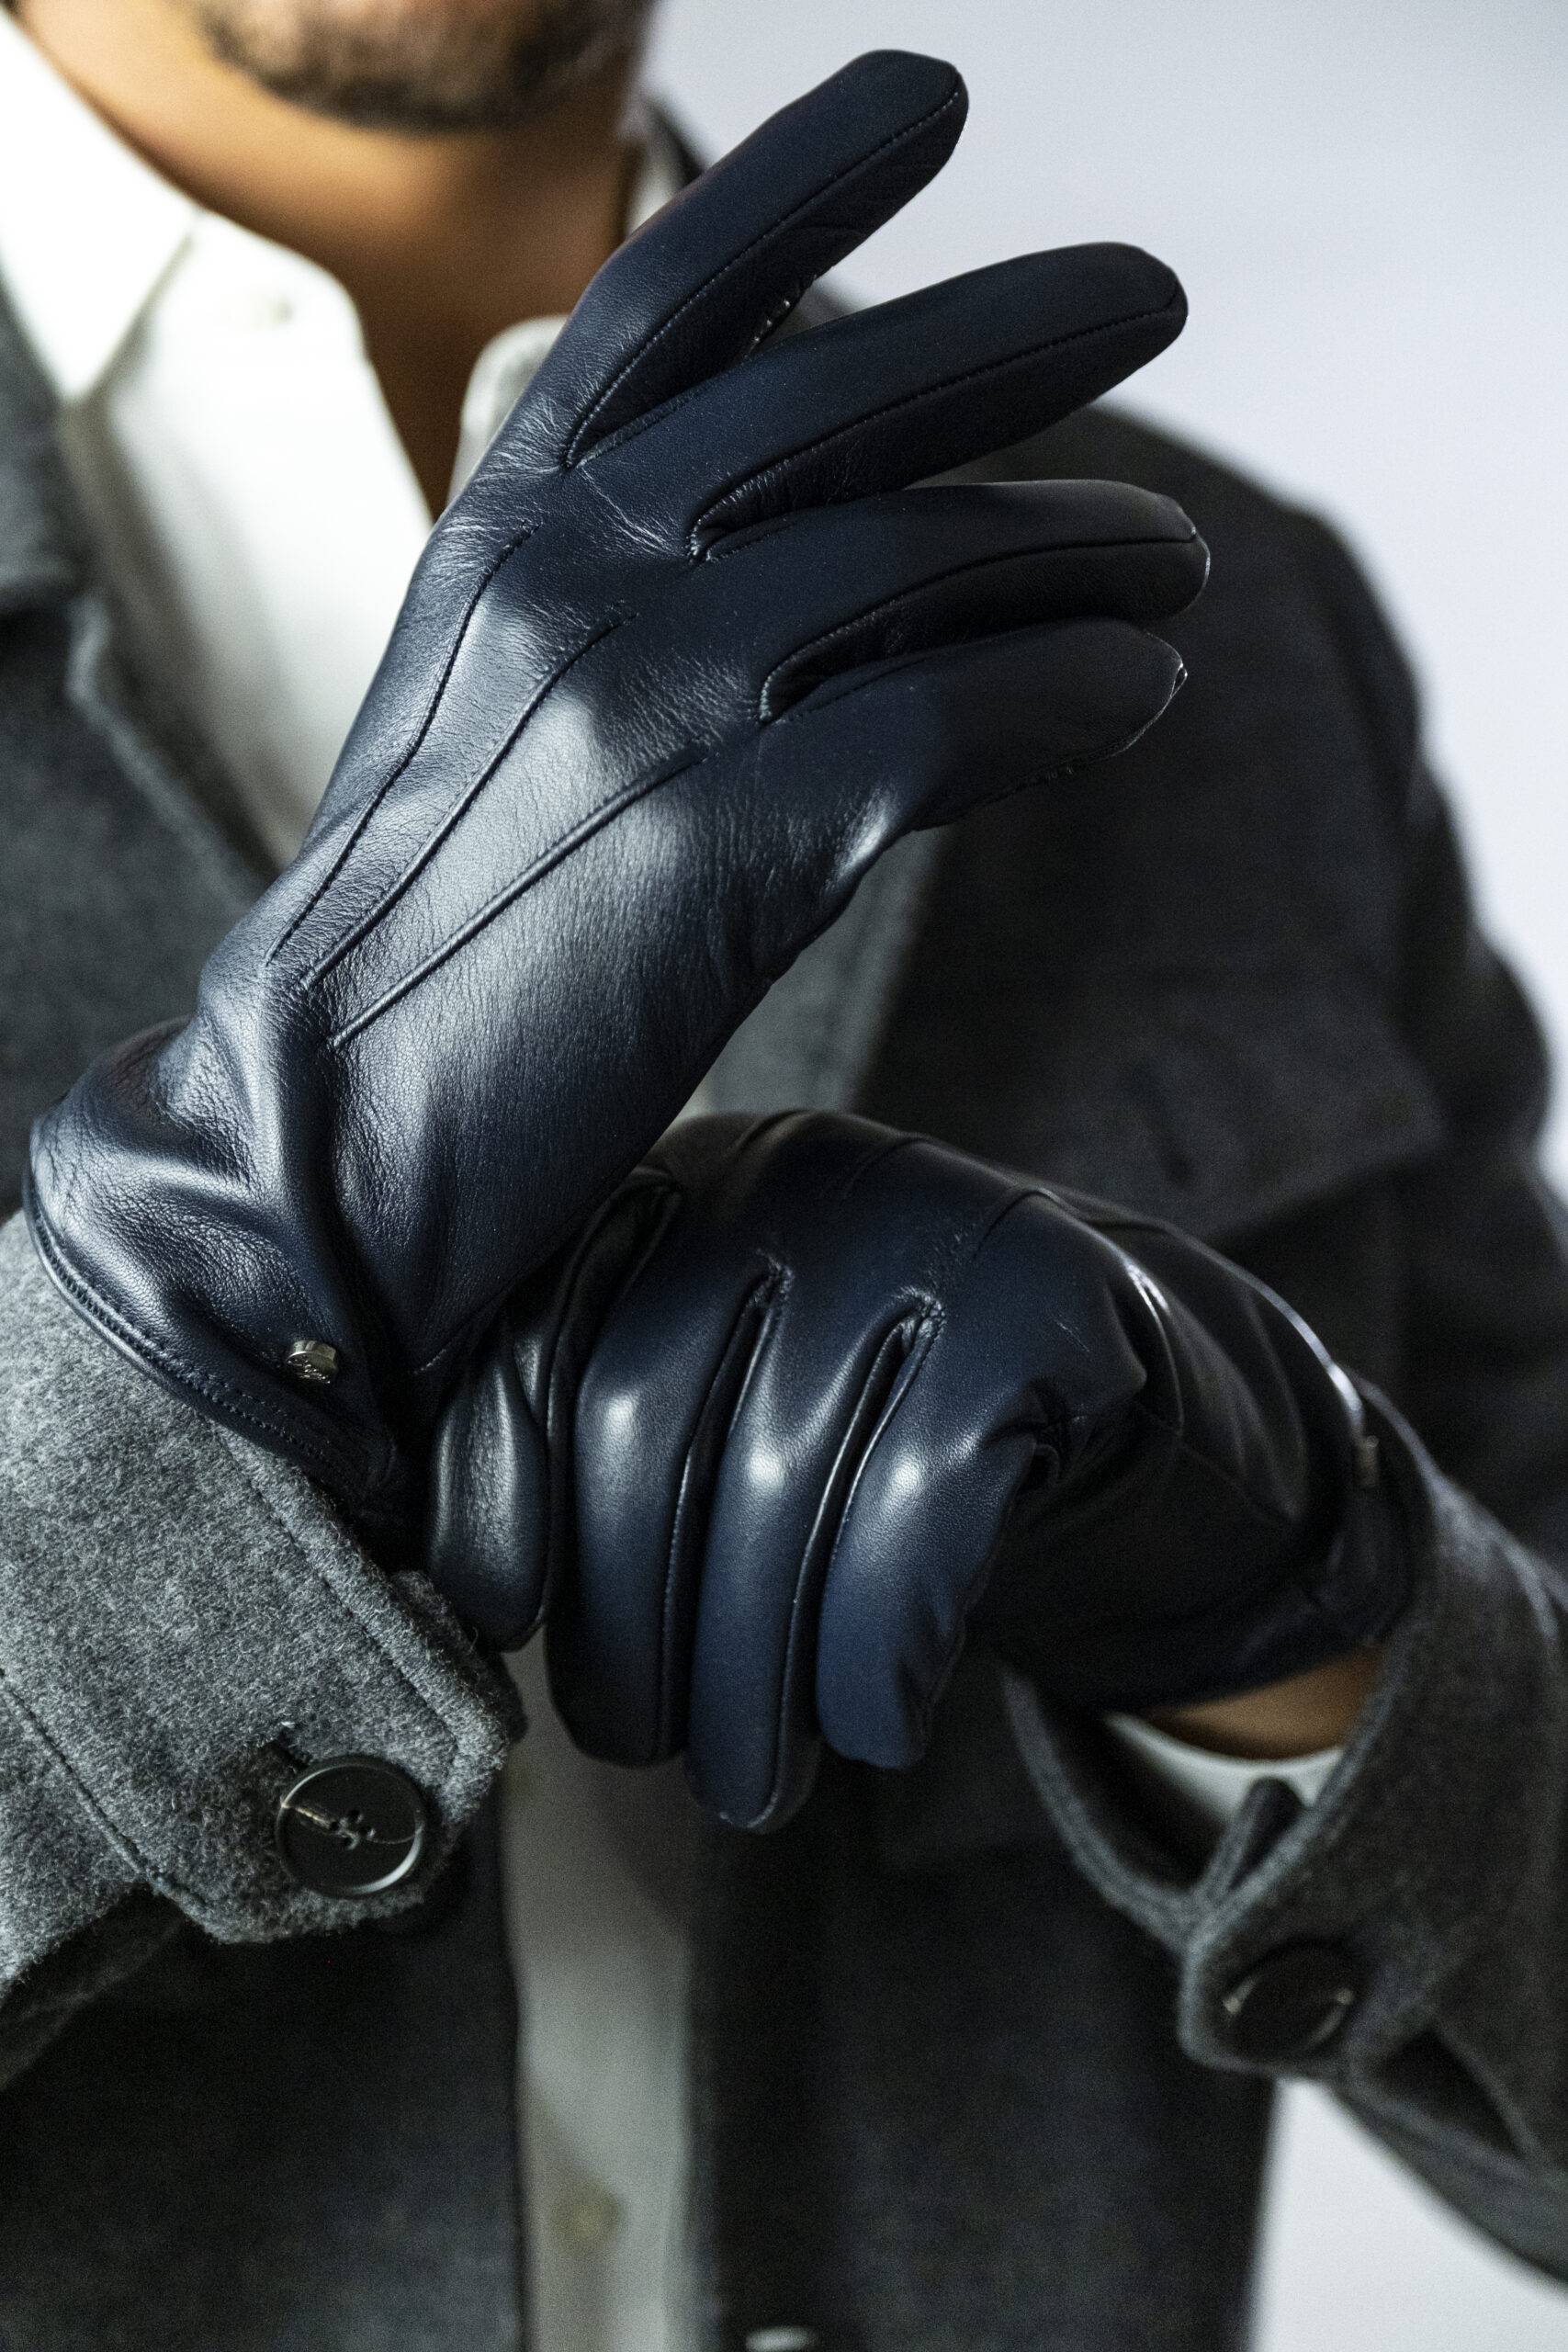 Nappa classic workable on touch screens cashmere lined - Merola Gloves ...